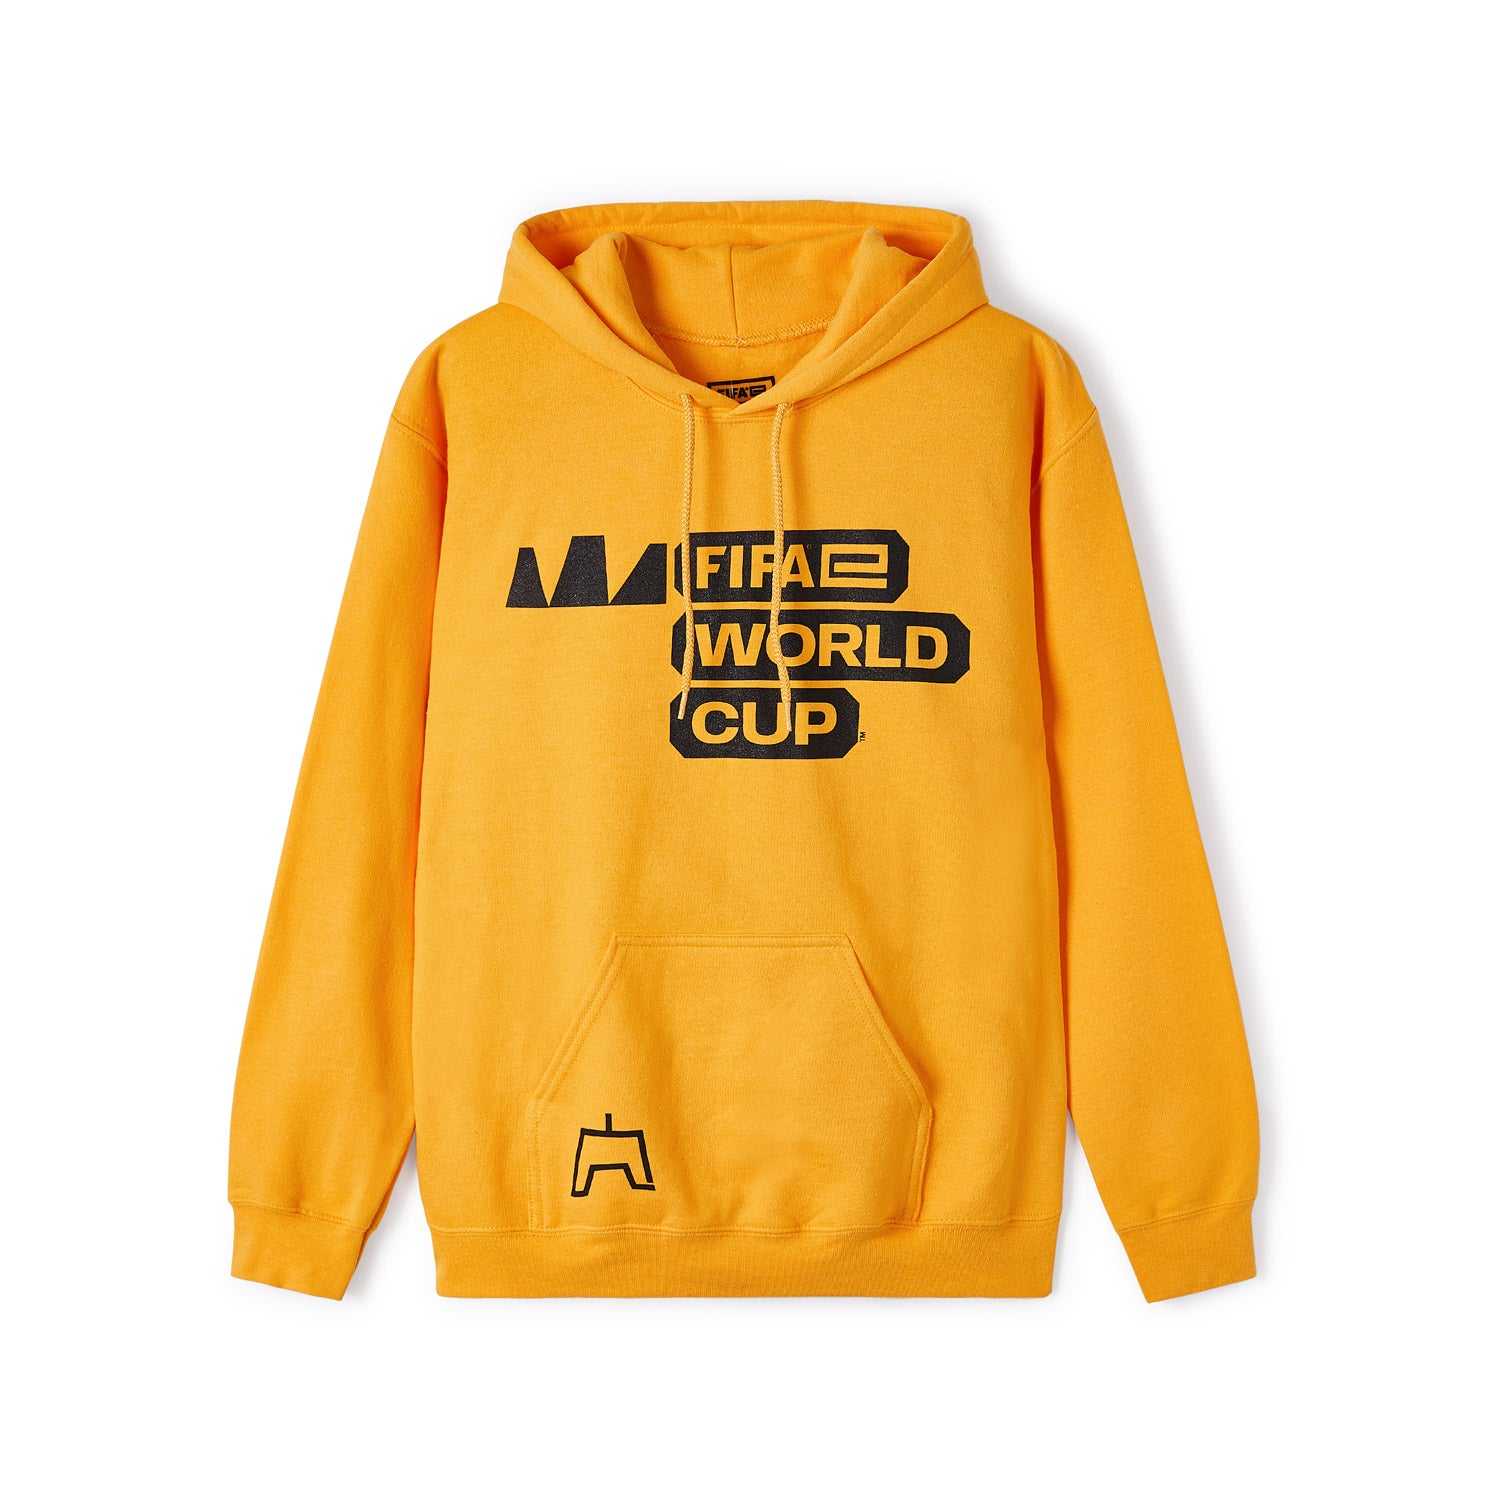 FIFAe World Cup Hoodie Yellow - Mens